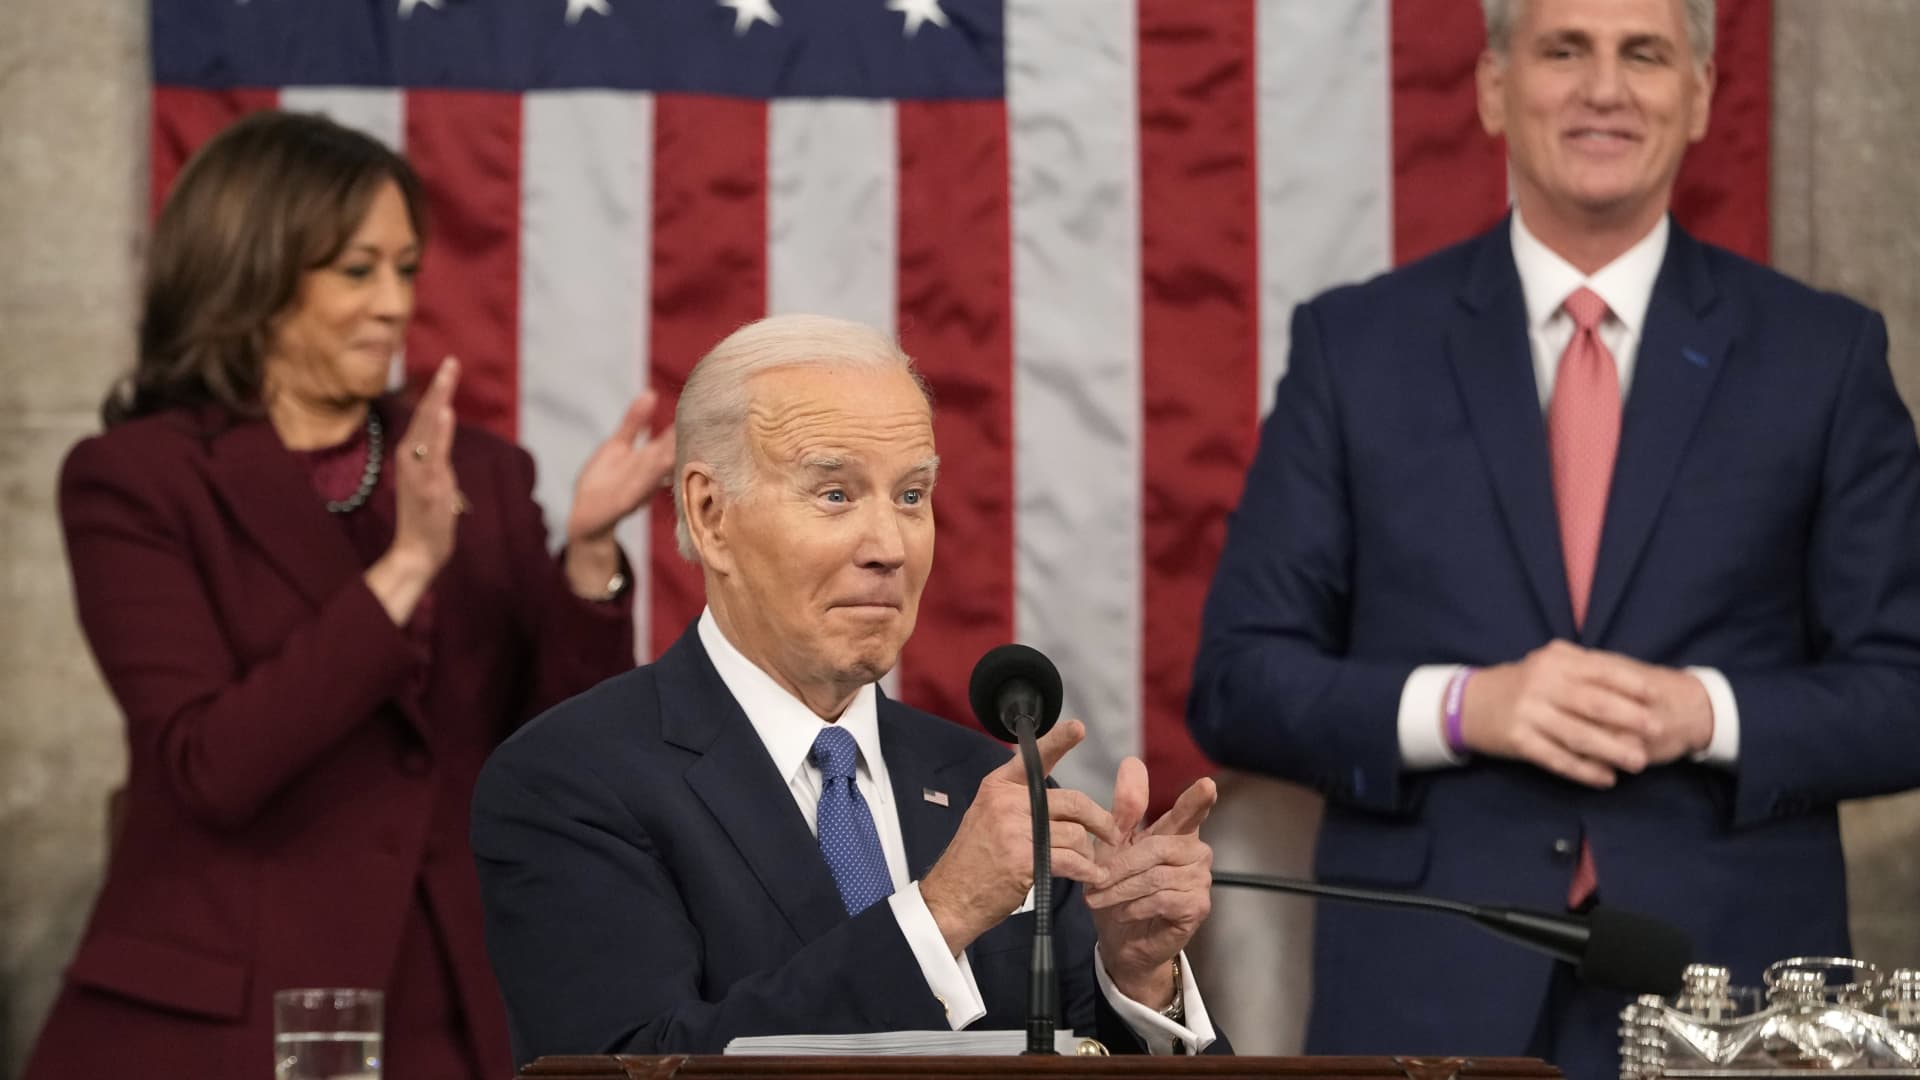 U.S. President Joe Biden delivers the State of the Union address to a joint session of Congress as Vice President Kamala Harris and House Speaker Kevin McCarthy (R-CA) listen on February 7, 2023 in the House Chamber of the U.S.